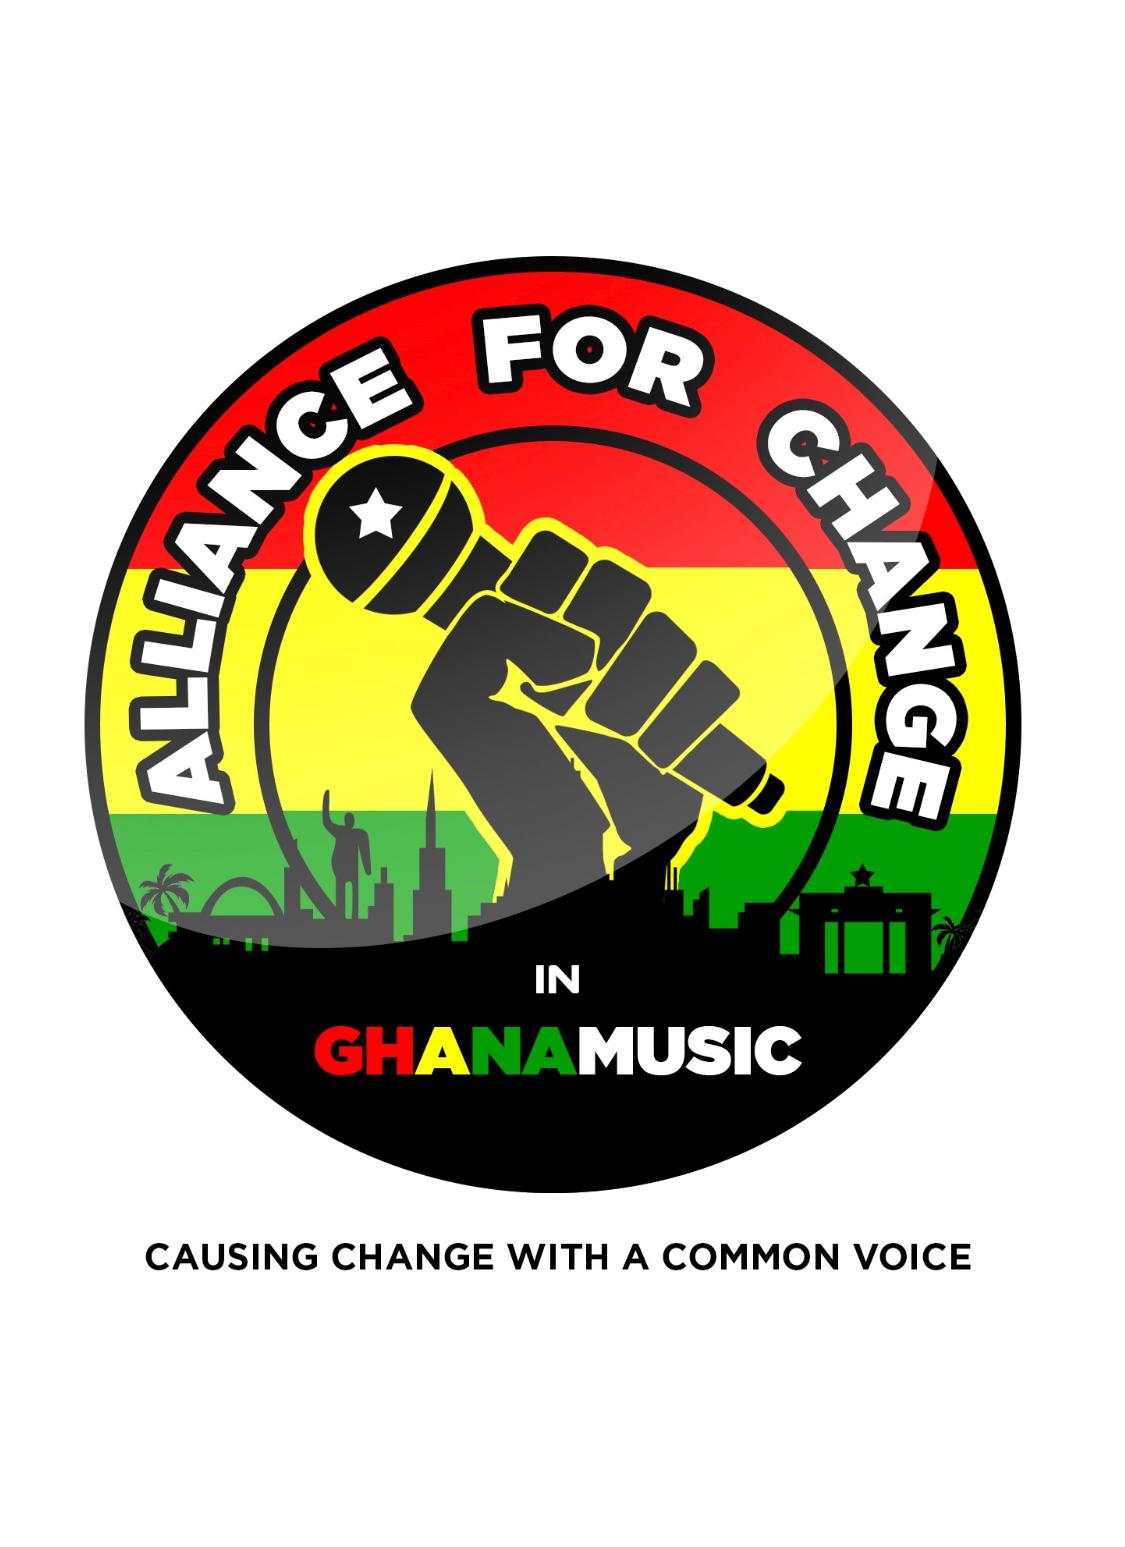 Artistes call for change in structures for Ghanaian music industry